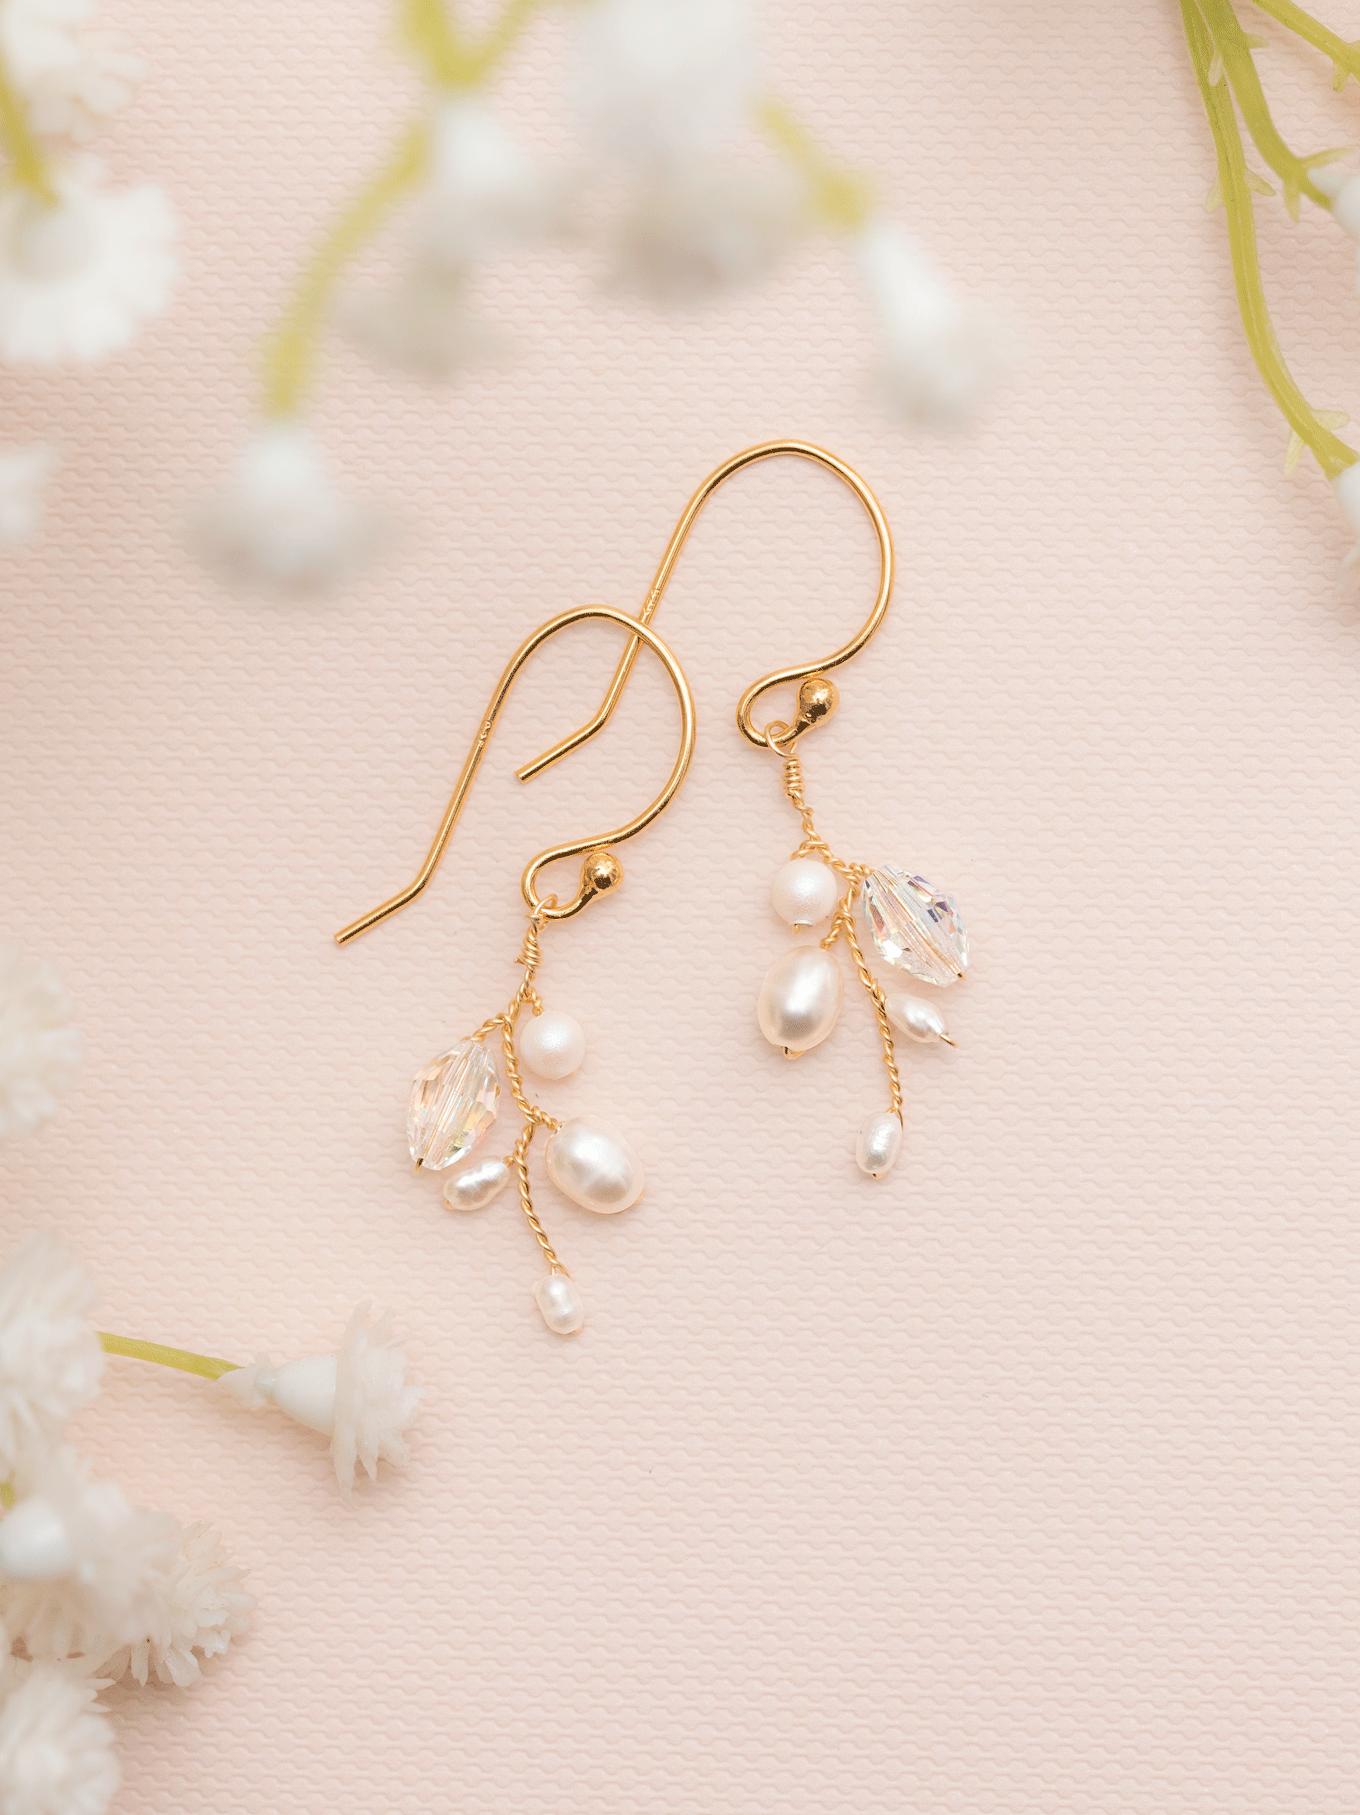 The Florentina Earrings are a whimsical take on crystals & pearls ...